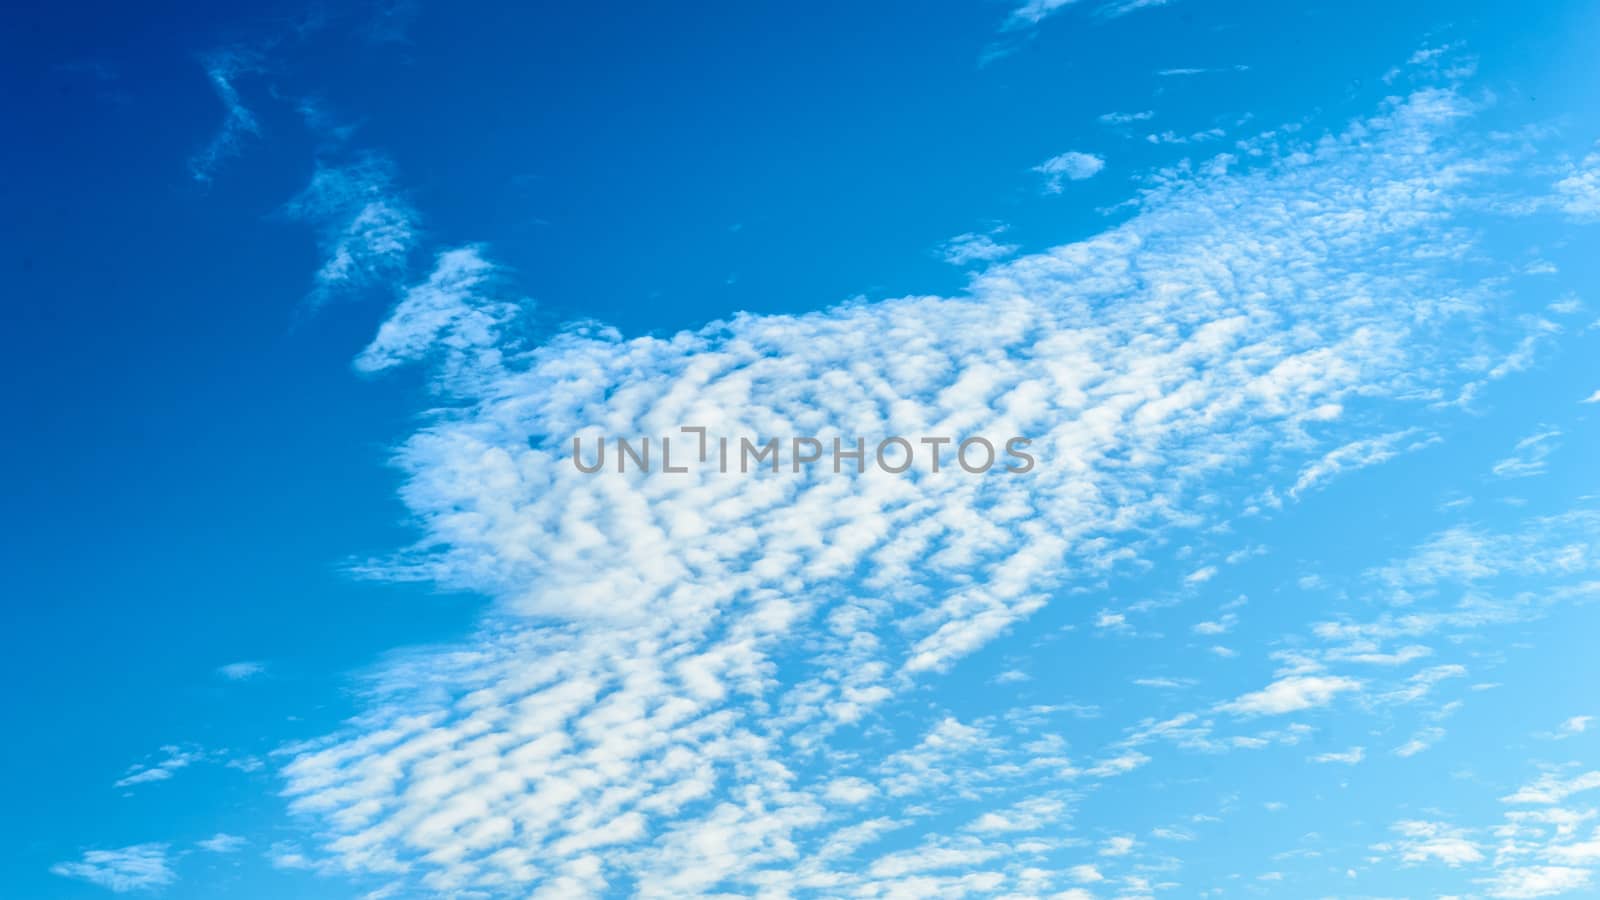 Cloudy sky background. Blue sky clouds background. Aesthetic blue sky wallpaper. Beautiful Cloudscape photography in summer. Tranquility theme. Copy space room for text in the middle of the Image. by sudiptabhowmick